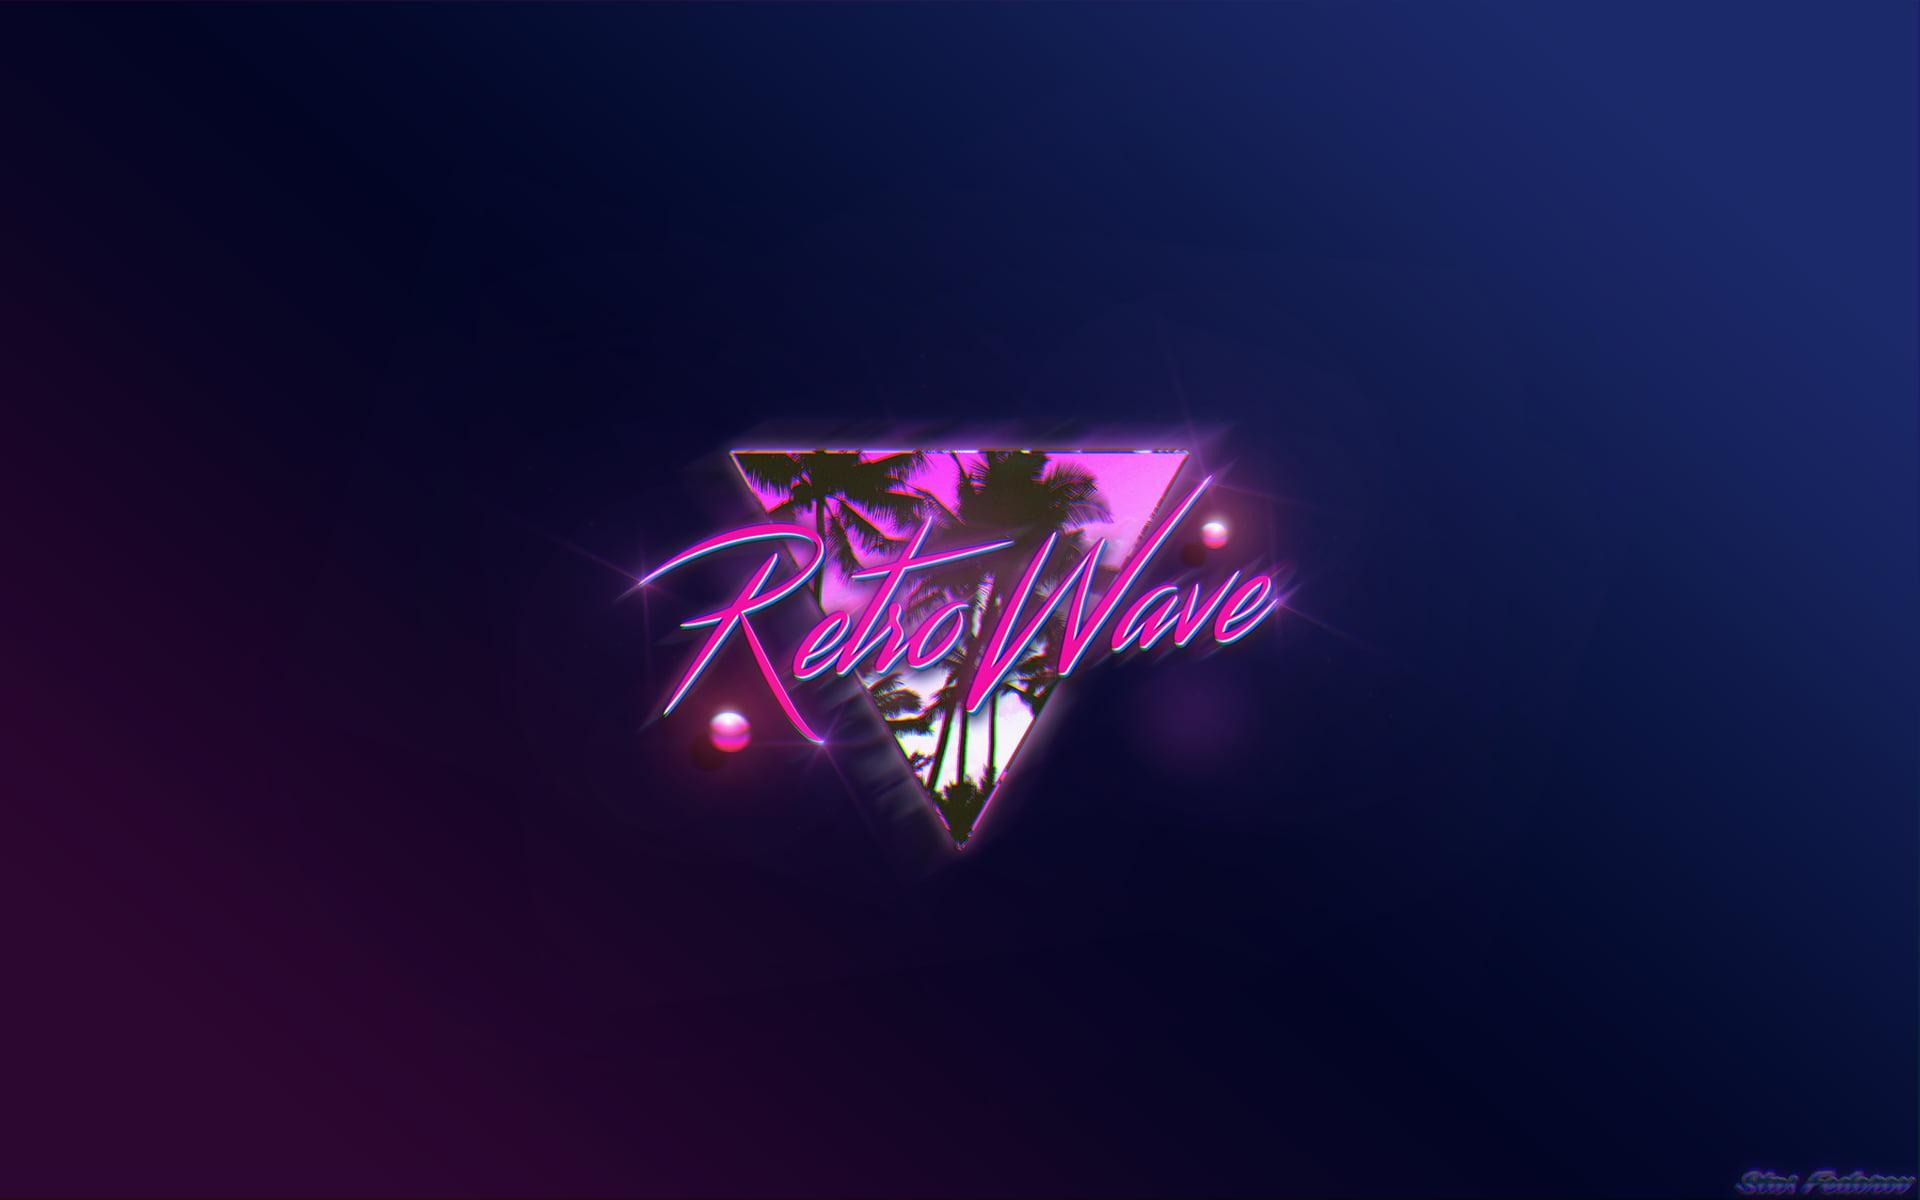 Pink and black Retro Wave logo, New Retro Wave, synthwave